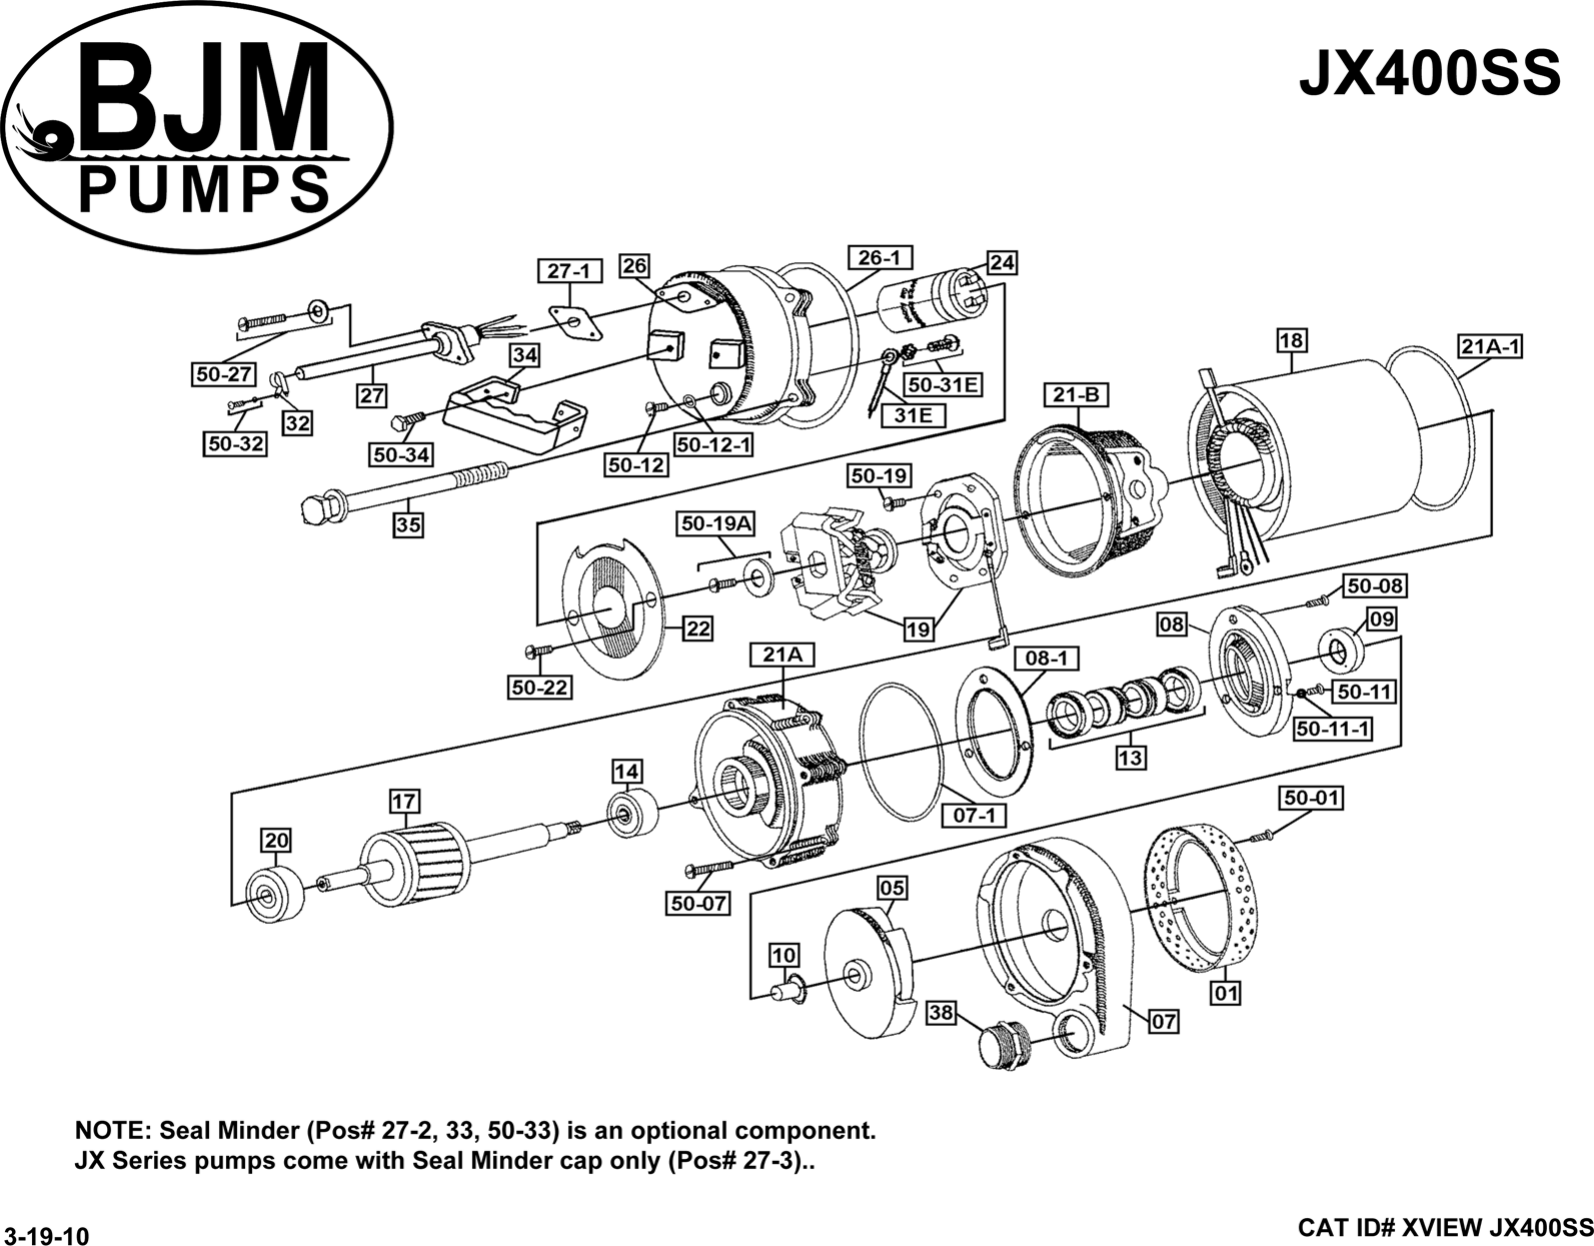 Page 1 of 5 - 136178 6 Bjm Jxh Series Exploded View User Manual